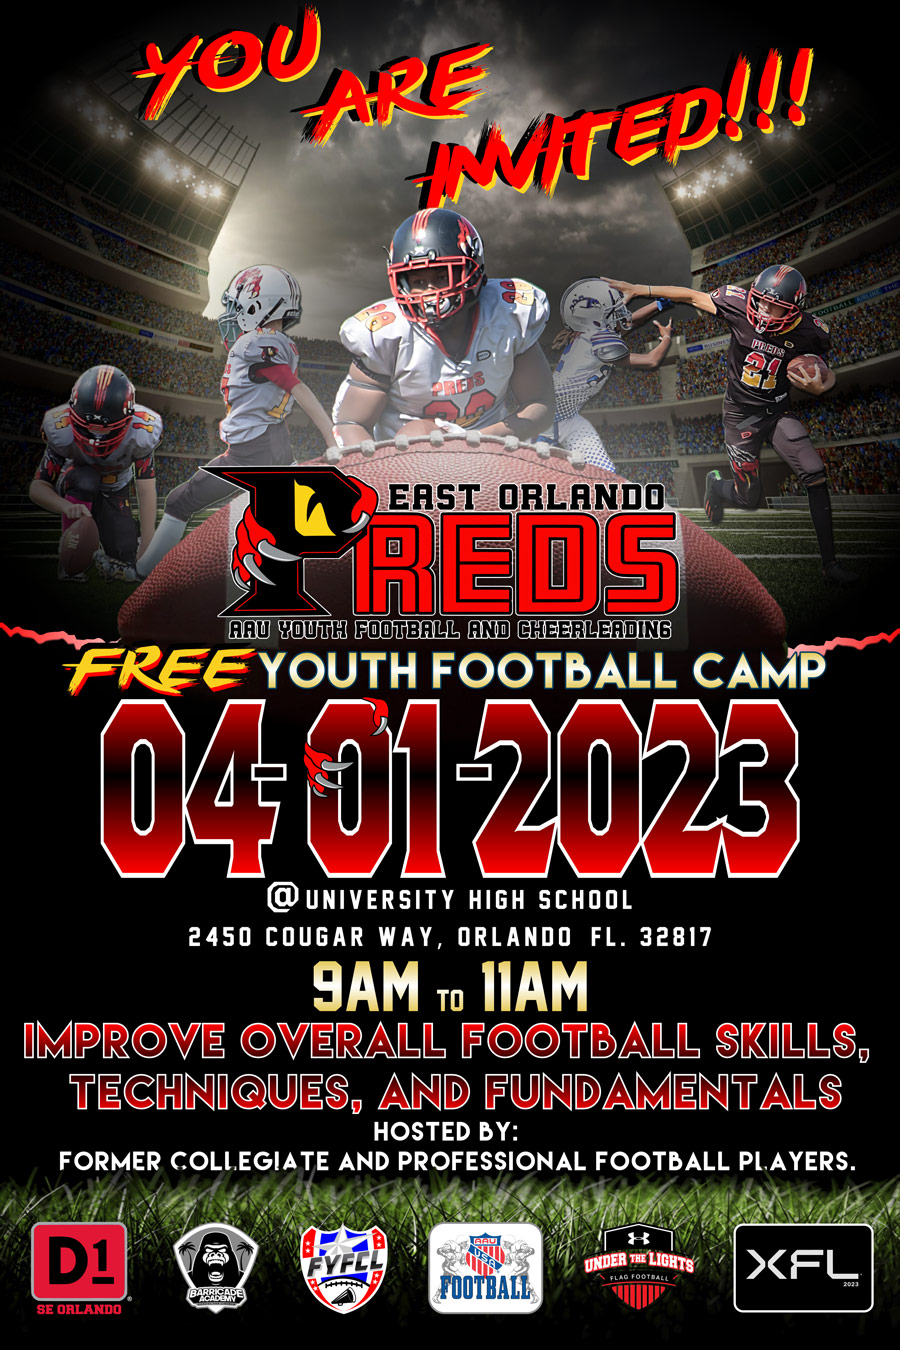 FREE Youth Football Camp April 1st - East Orlando Preds